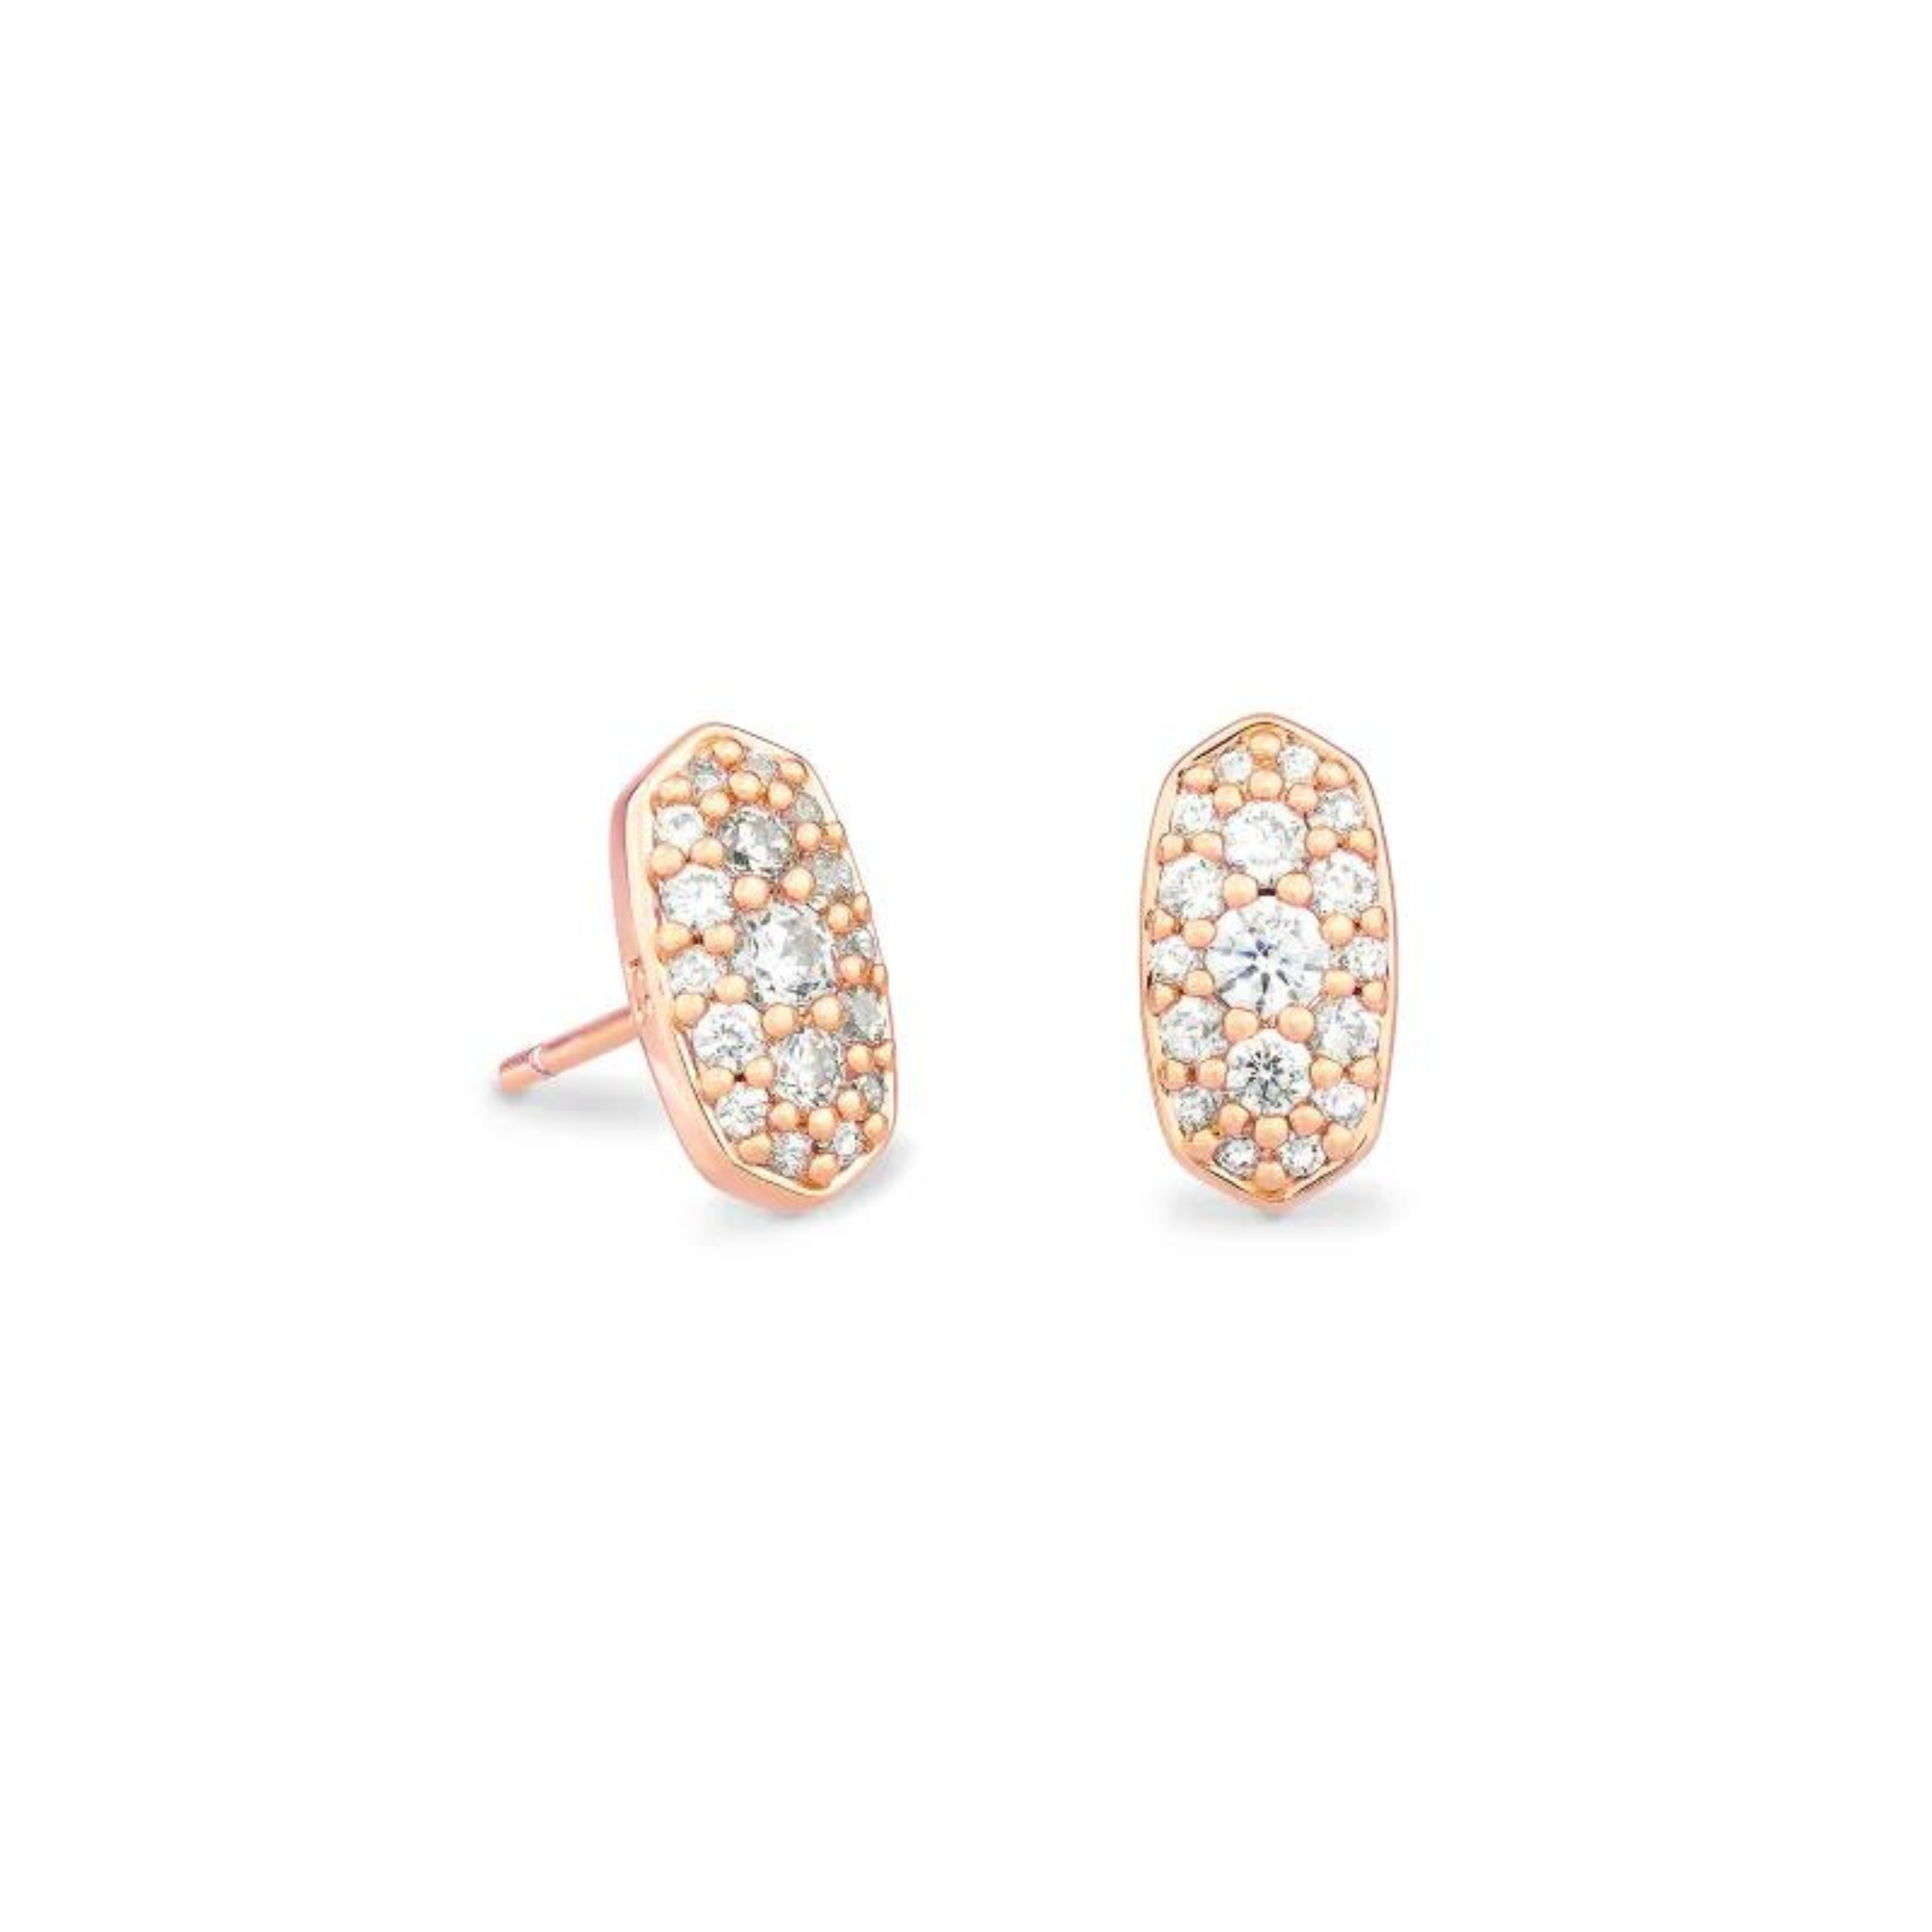 Rose gold crystal stud earrings, pictured on a white background.